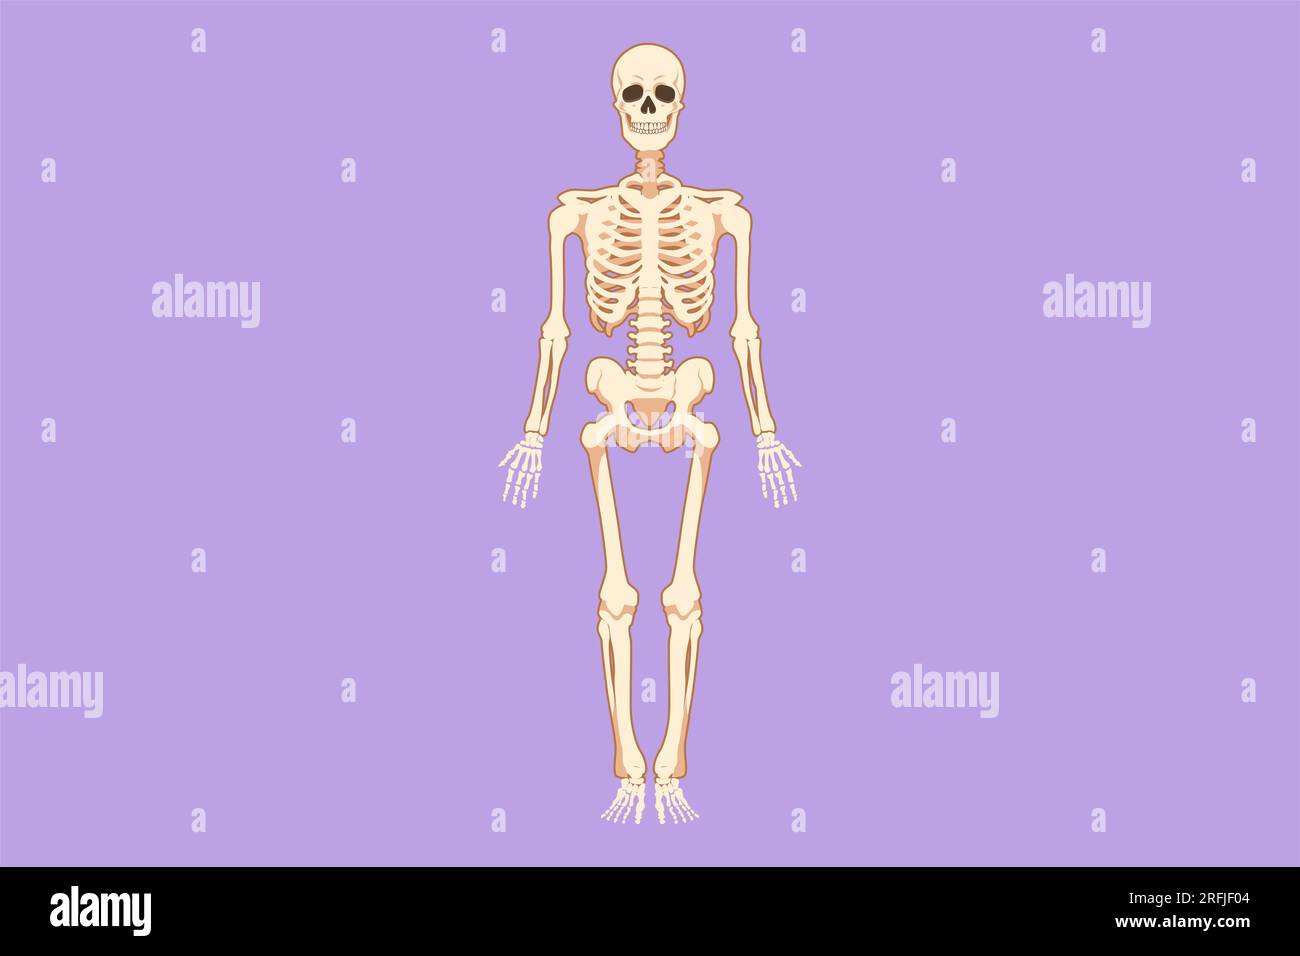 Cartoon flat style drawing front view of human skeleton image logo icon, useful for creating medical and scientific materials. Anatomy, medicine and b Stock Photo